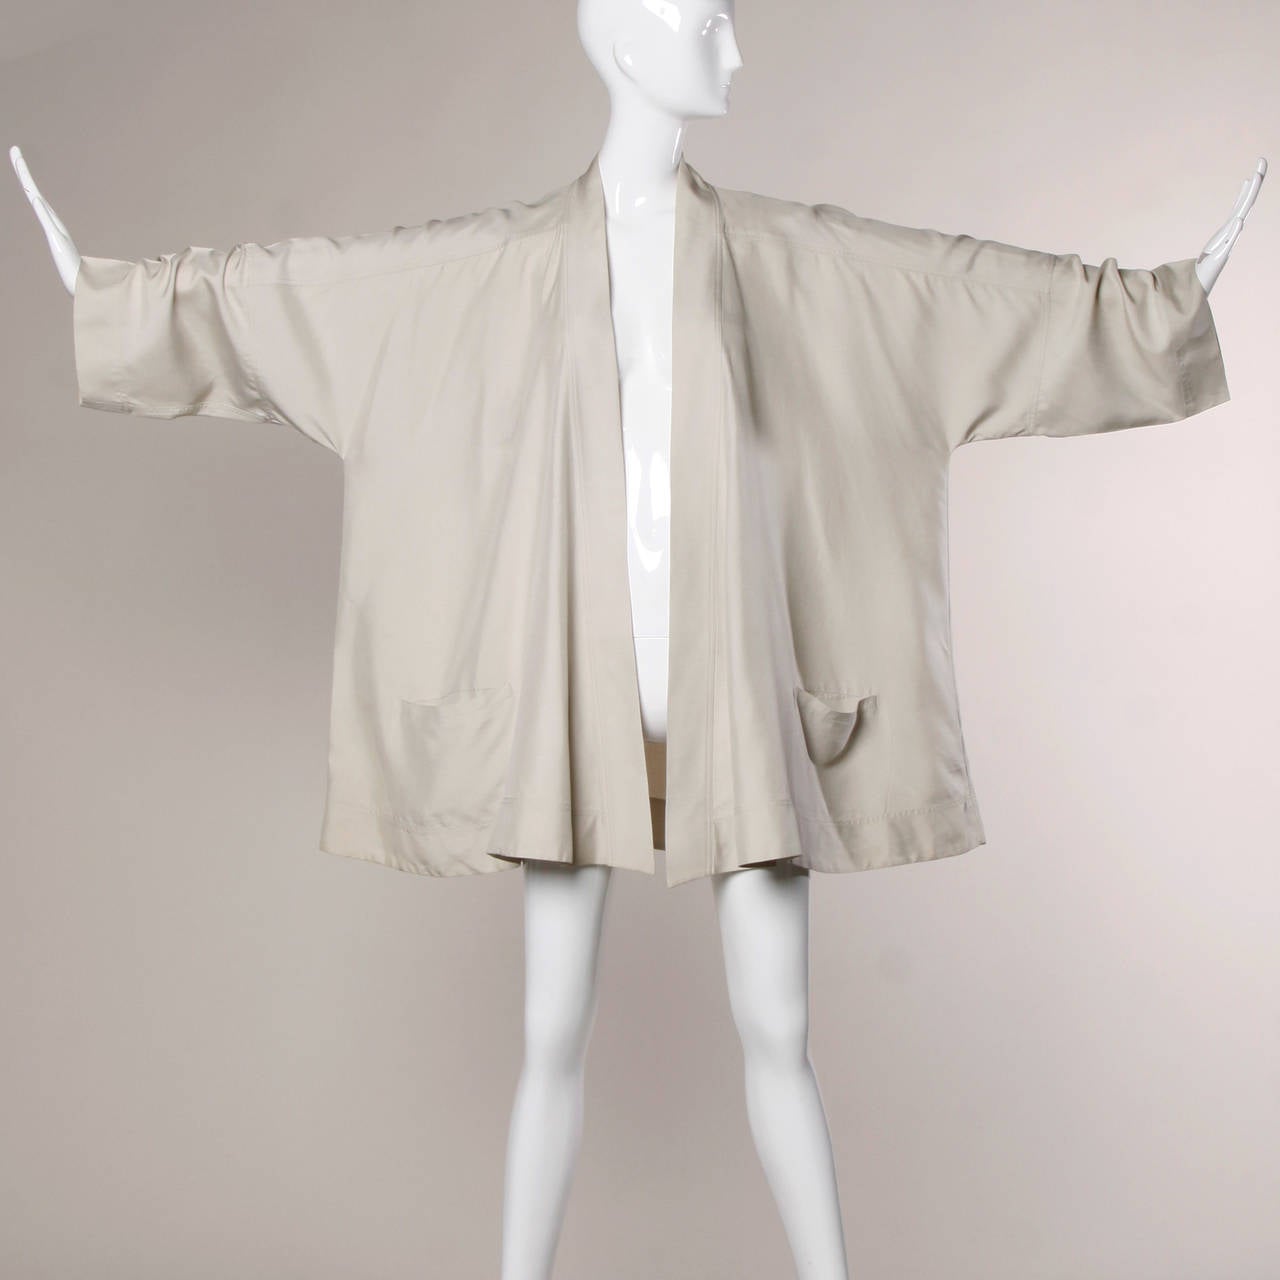 Stunning vintage Salvatore Ferragamo silk swing coat or kimono jacket. Oversized fit and huge sweep.

Details:

Unlined
Front Pockets
No Closure
Marked Size: 42
Estimated Size: Free
Color: Neutral
Fabric: 100% Silk
Label: Salvatore